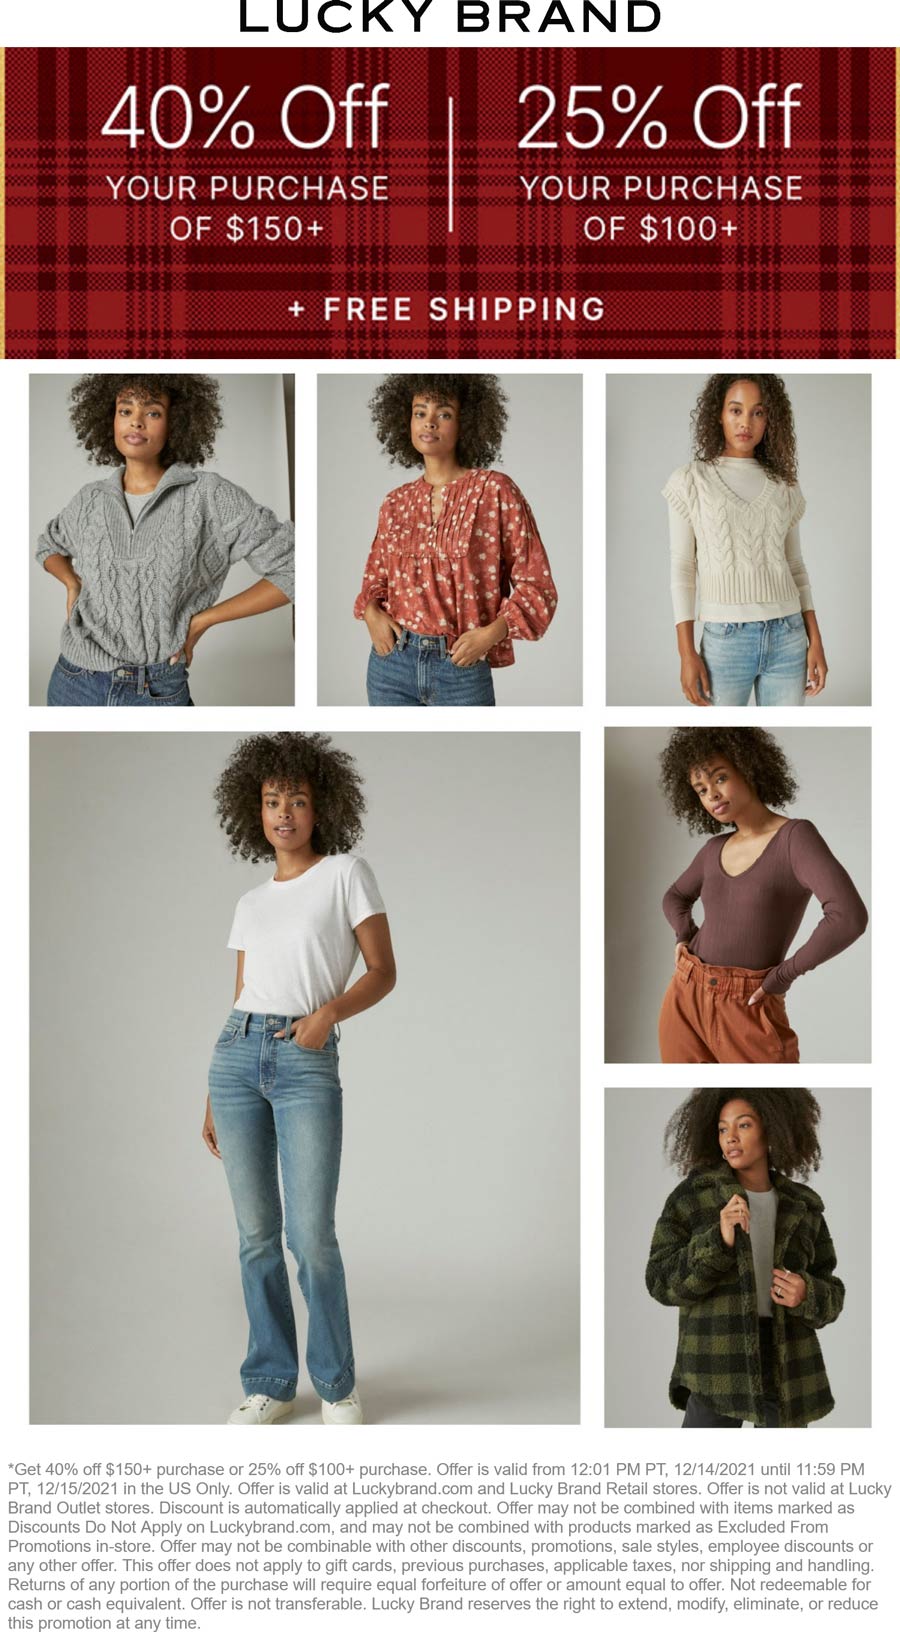 Lucky Brand stores Coupon  25-40% off $100+ today at Lucky Brand, ditto online #luckybrand 